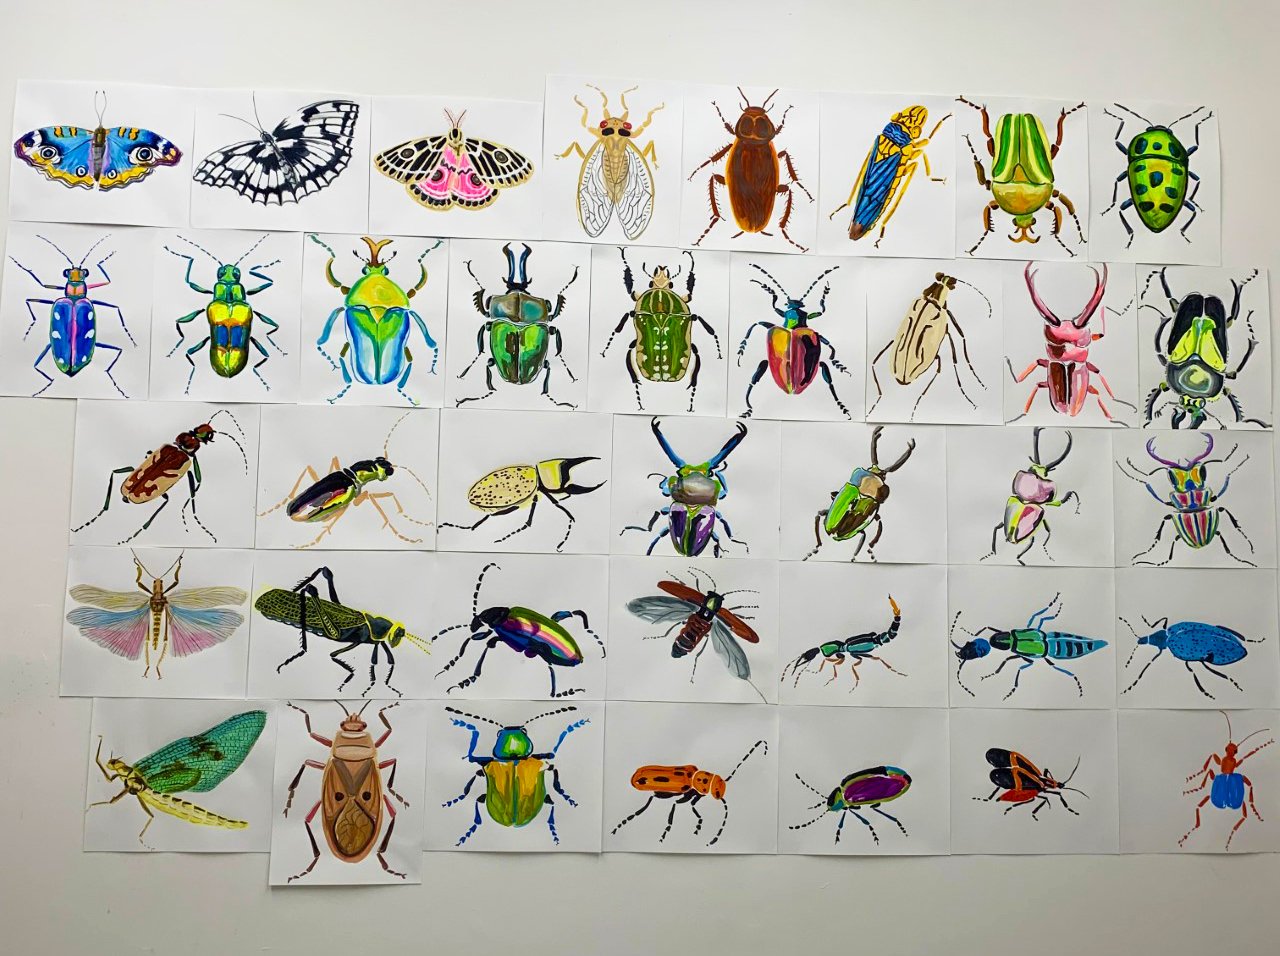   Wall of Insects   acrylic ink on paper 14”x17” each  38 total  2022  